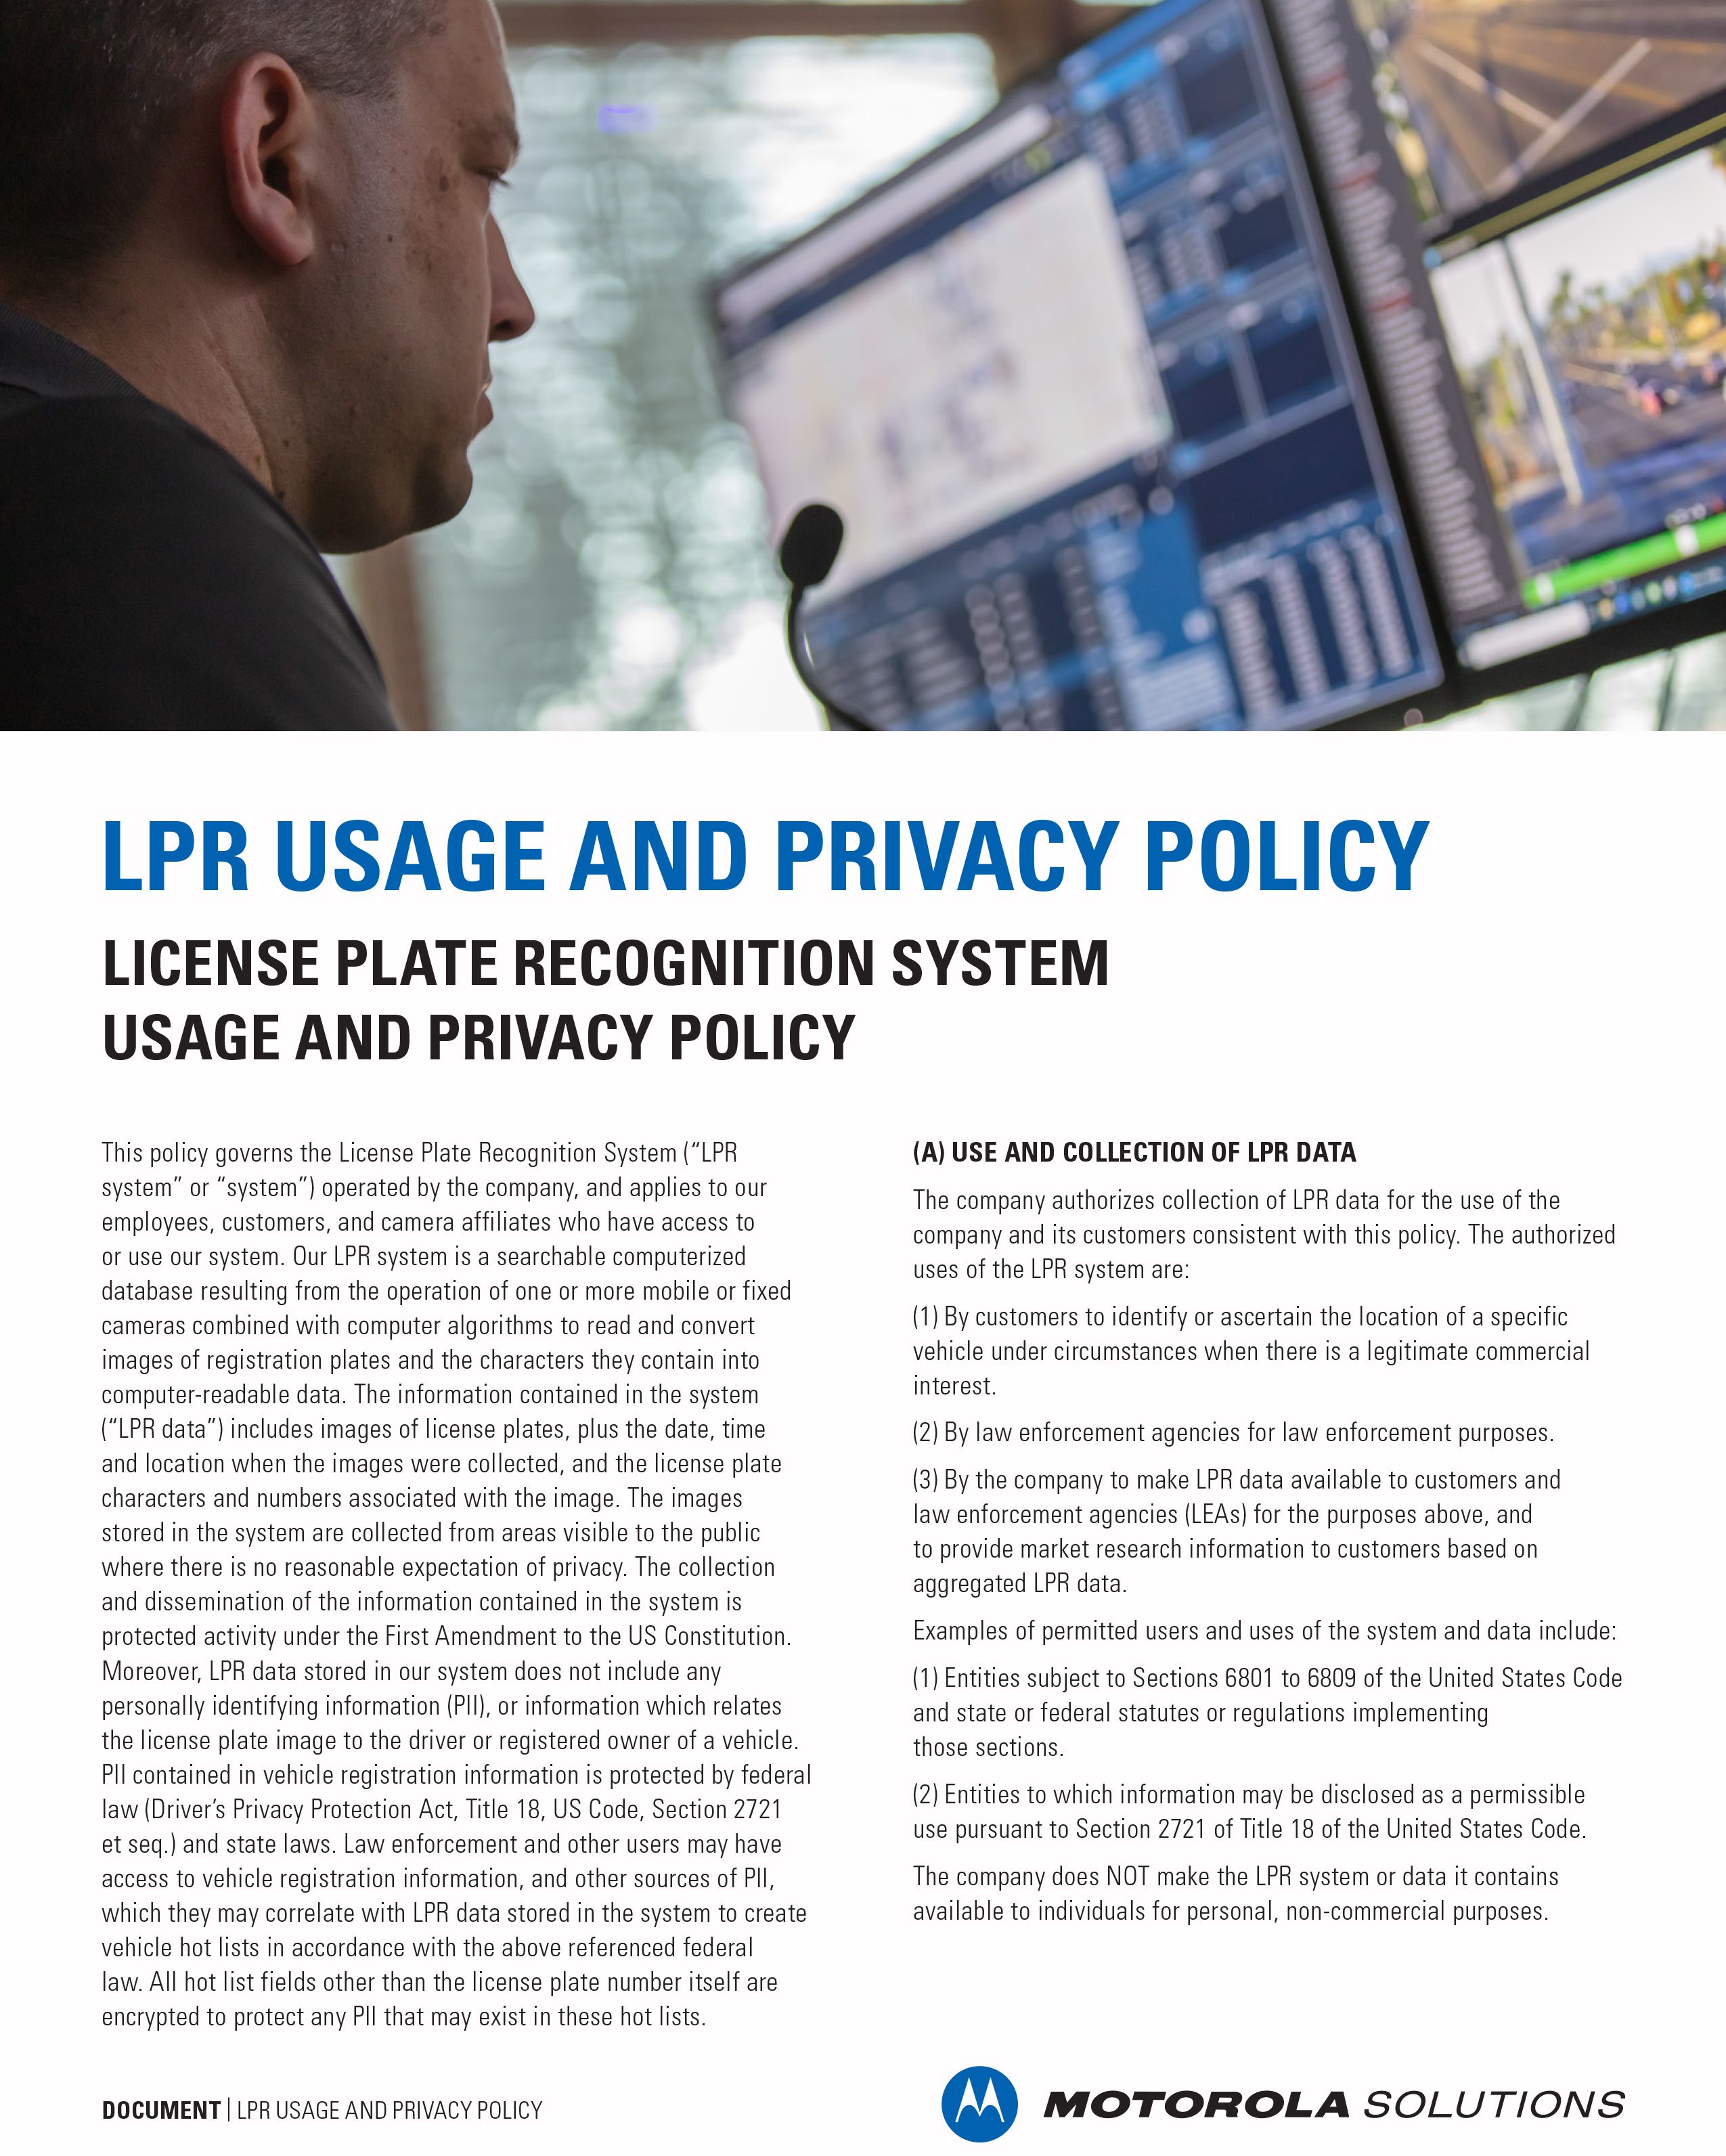 LPR Usage and Privacy Policy